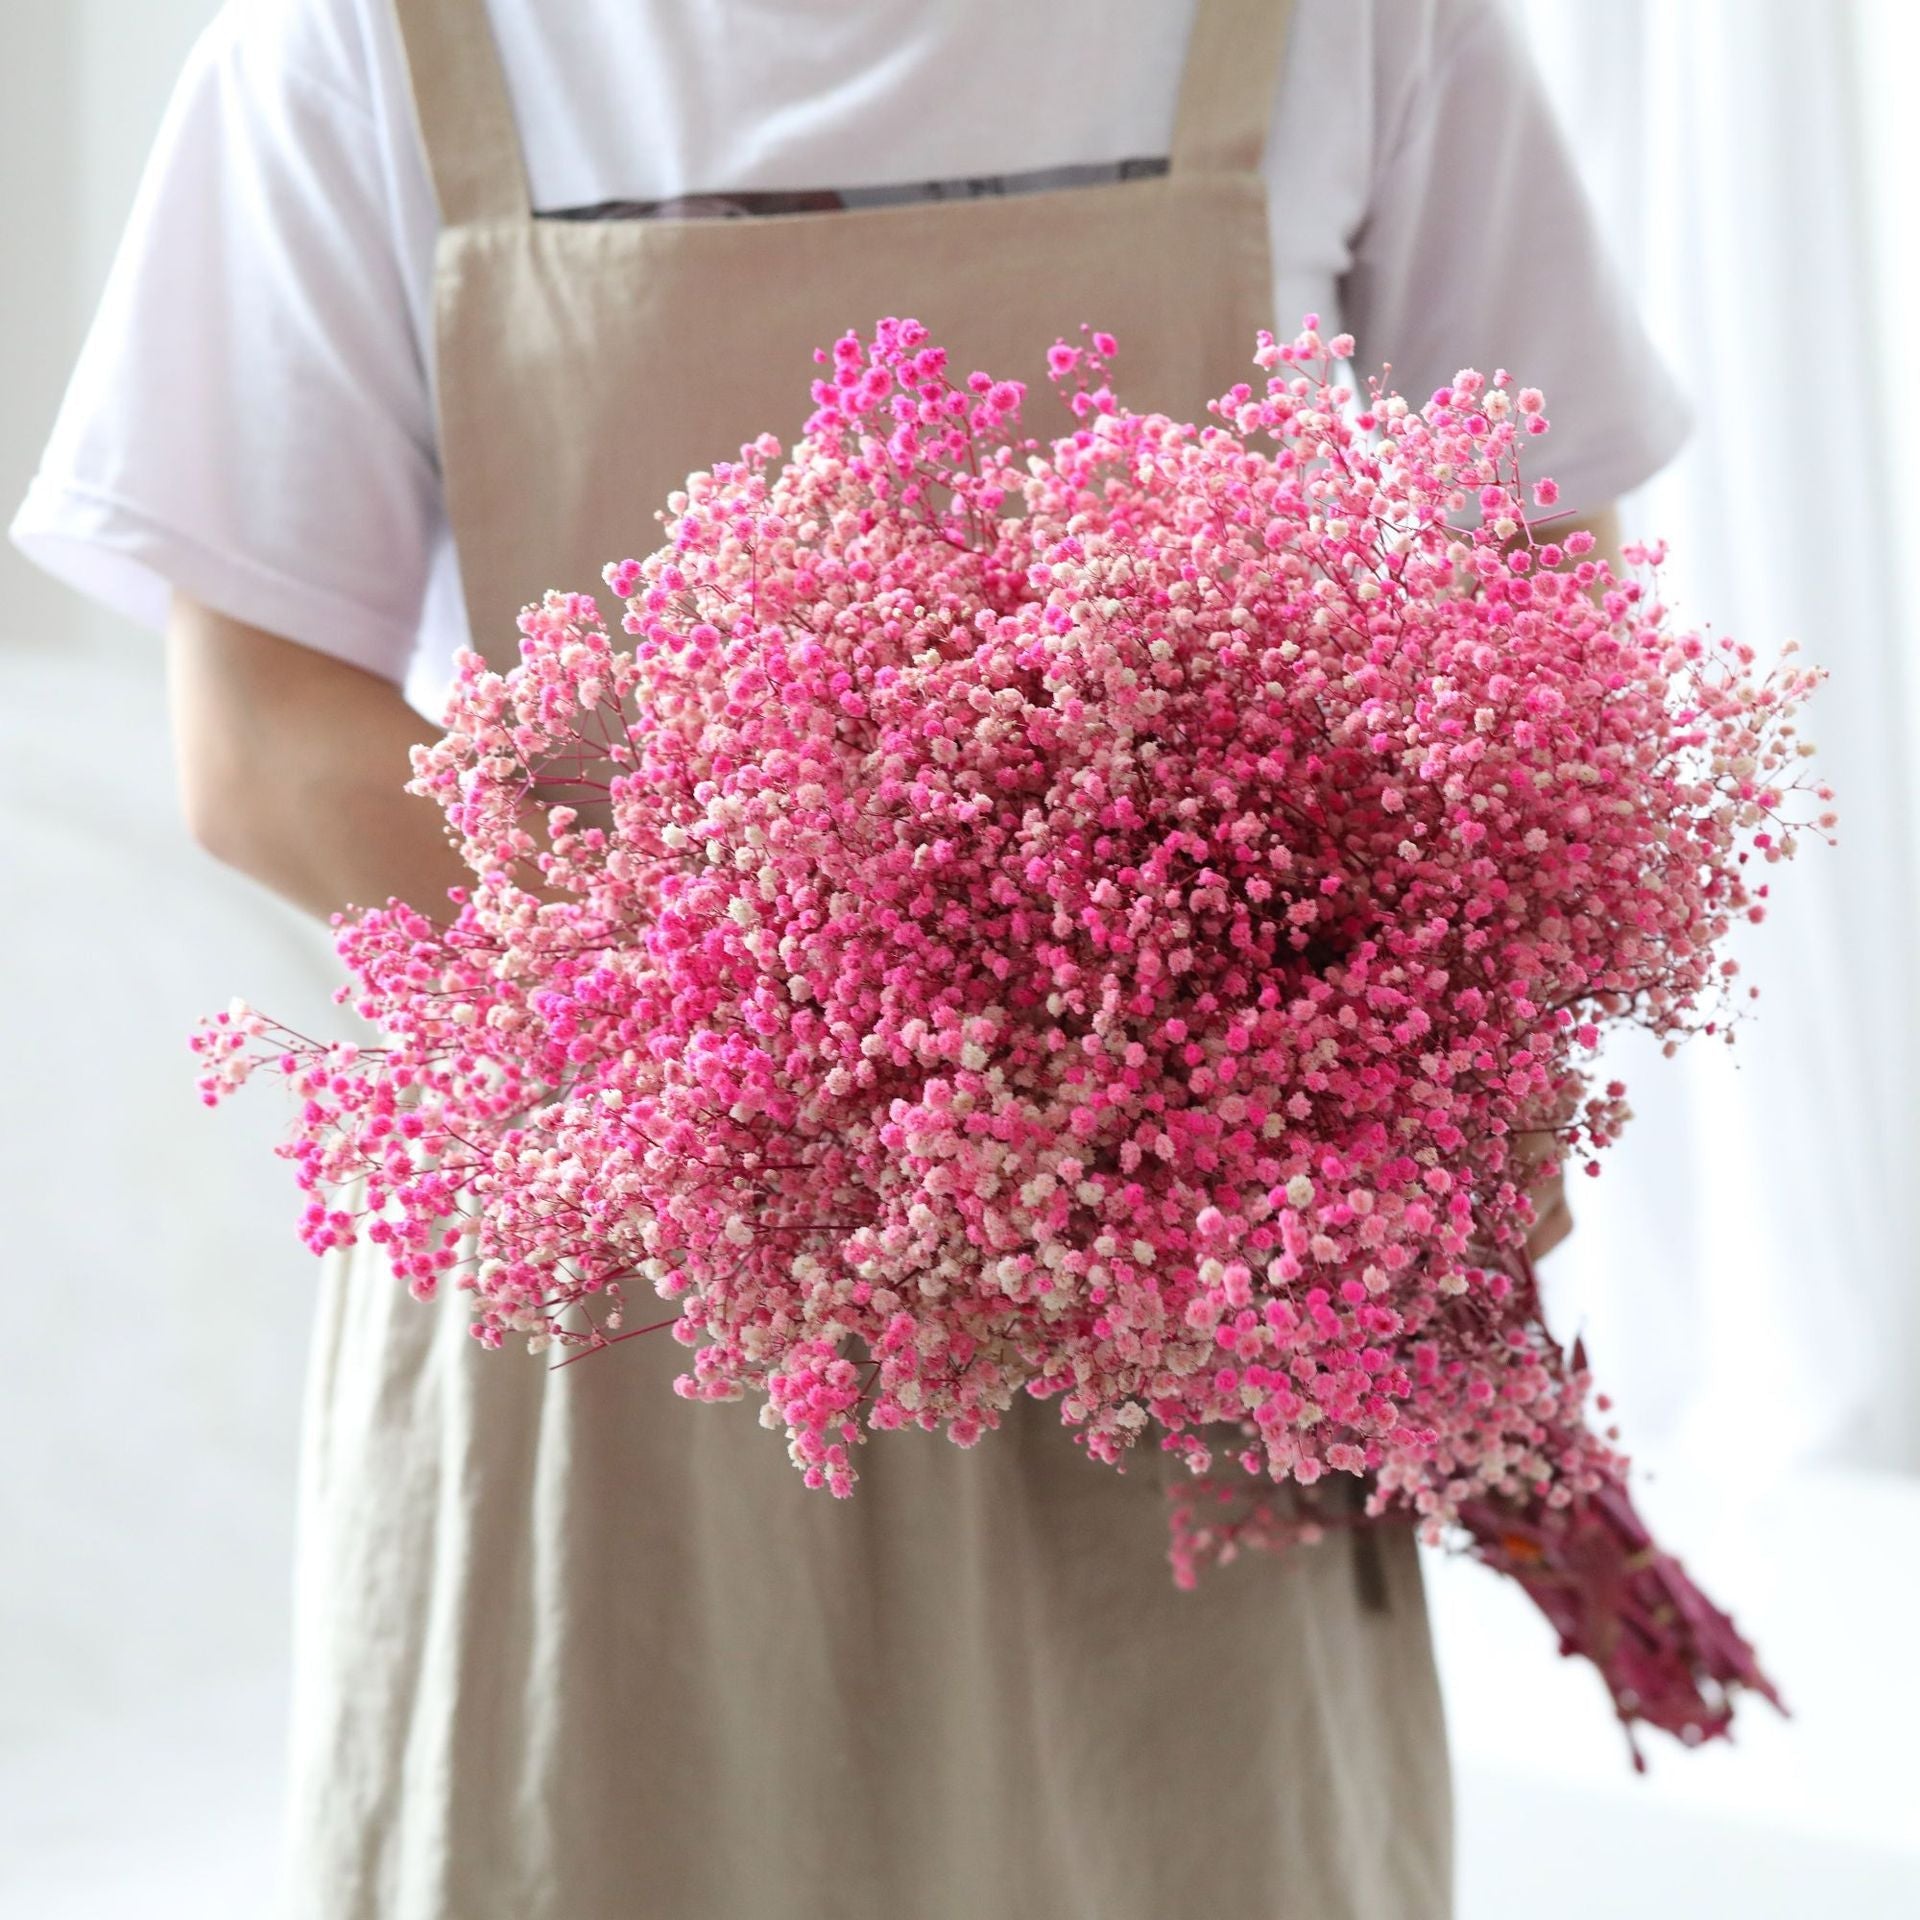 Natural Dried Preserved Flowers Gypsophila Flower Bouquets